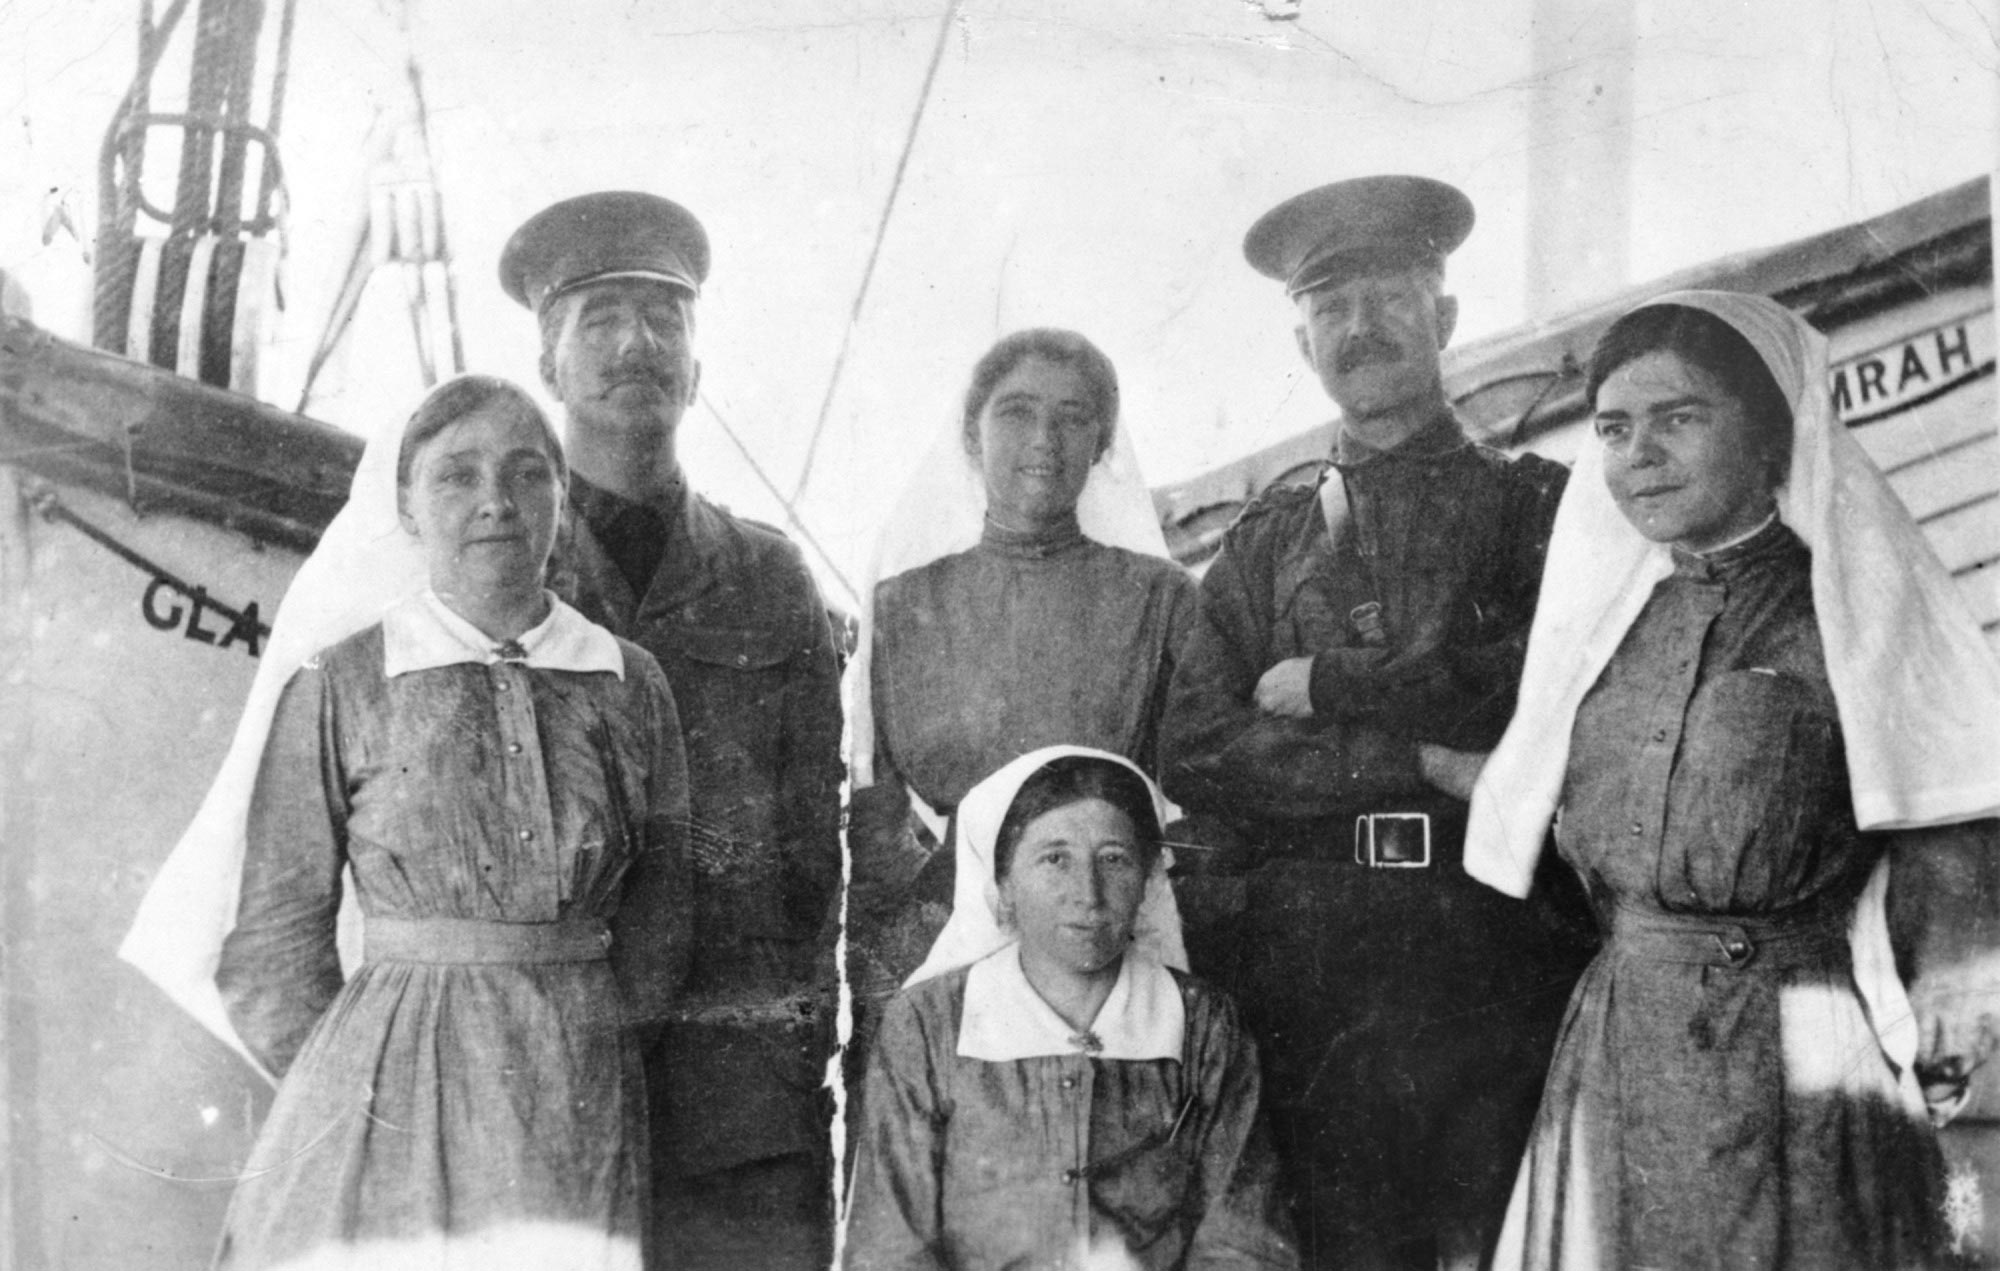 Group portrait of medical staff who sailed with the First Expeditionary Force onboard HMAT Omrah, September 1914.